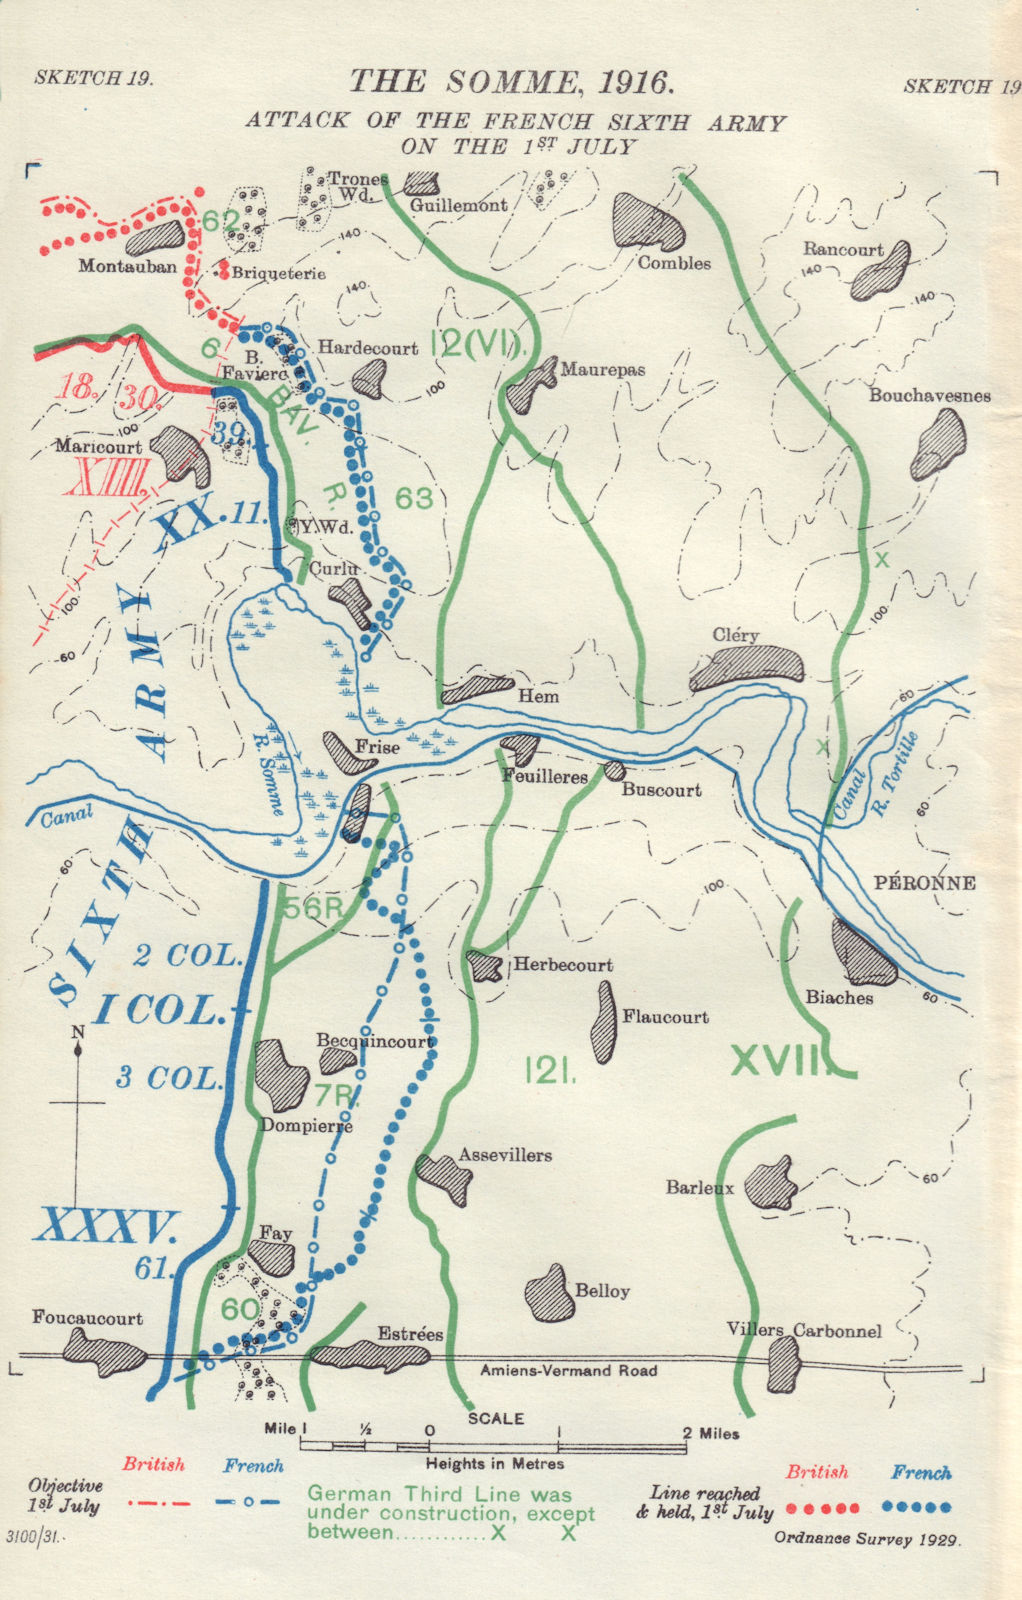 Associate Product Somme, 1916. Attack of French Sixth Army on 1st July. First World War. 1932 map